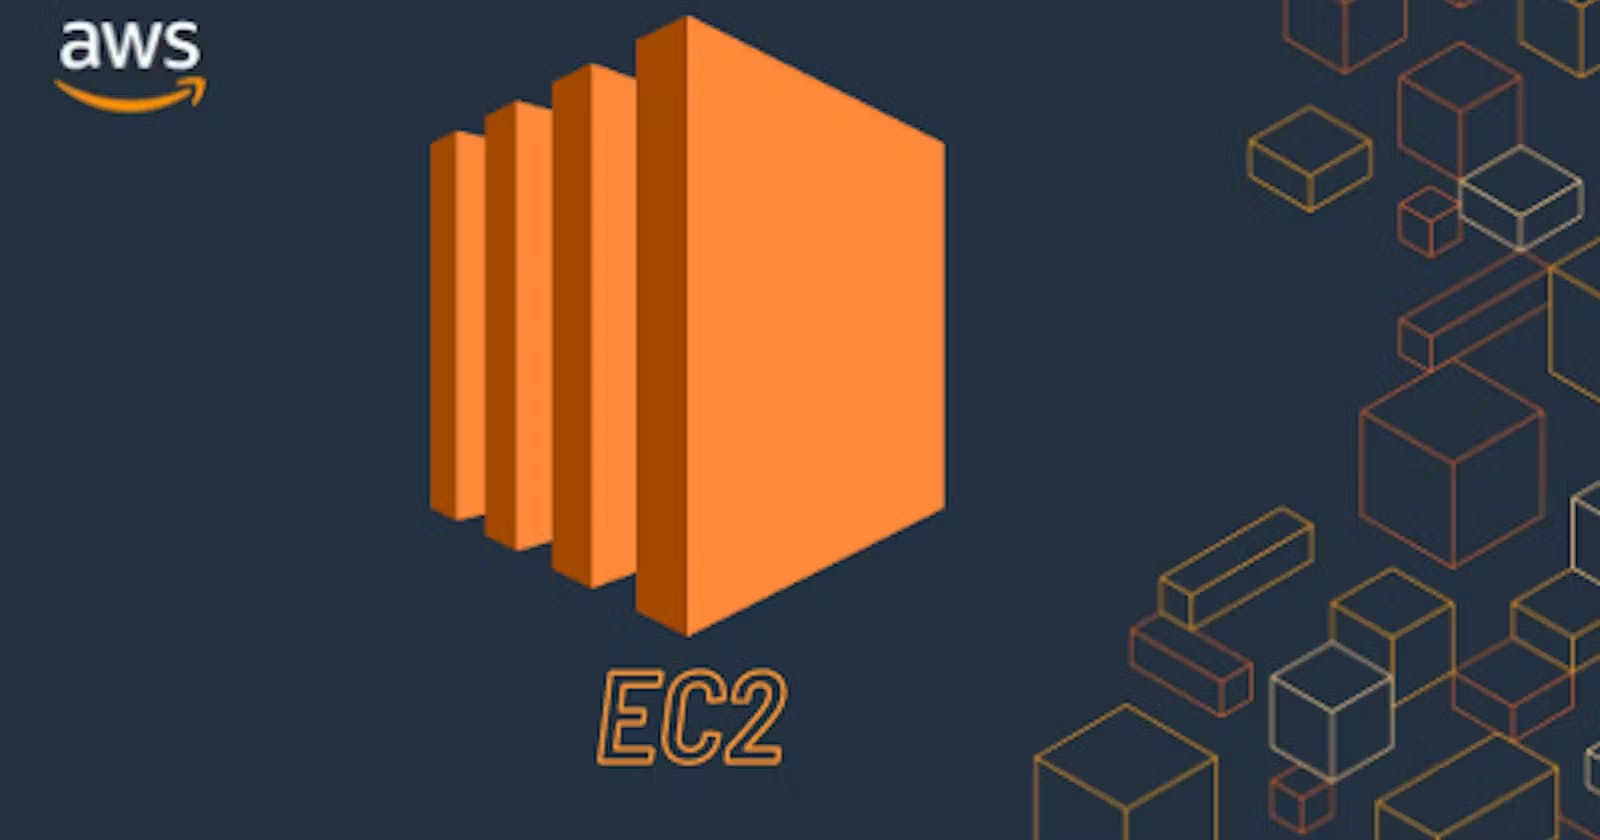 A Comprehensive Guide to Getting Started with Amazon EC2 - [ LAUNCH YOUR FIRST EC2 INSTANCE ]